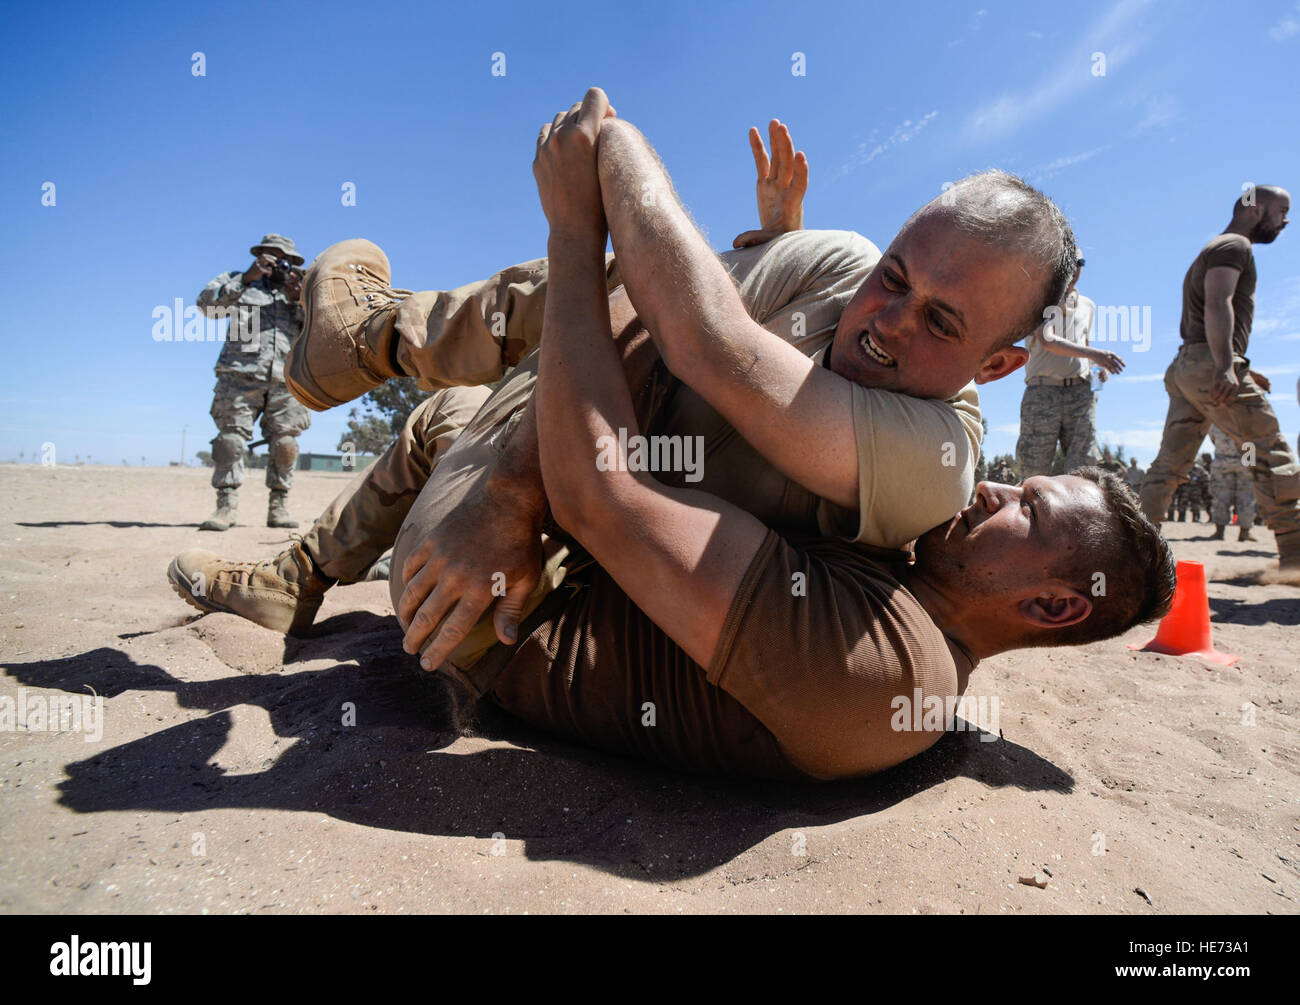 A U.S. Air Force Airman and a Royal Netherlands soldier wrestle after receiving a level two exposure to Oleoresin Capsicum 'pepper' spray as a part of a non-lethal weapons class during AFRICAN LION 16 at Tifnit, Kingdom of Morocco, April 23, 2016. The participants of the class had the opportunity to receive either a level one or two exposure before practicing non-lethal skills learned during the class.  Senior Airman Krystal Ardrey Stock Photo